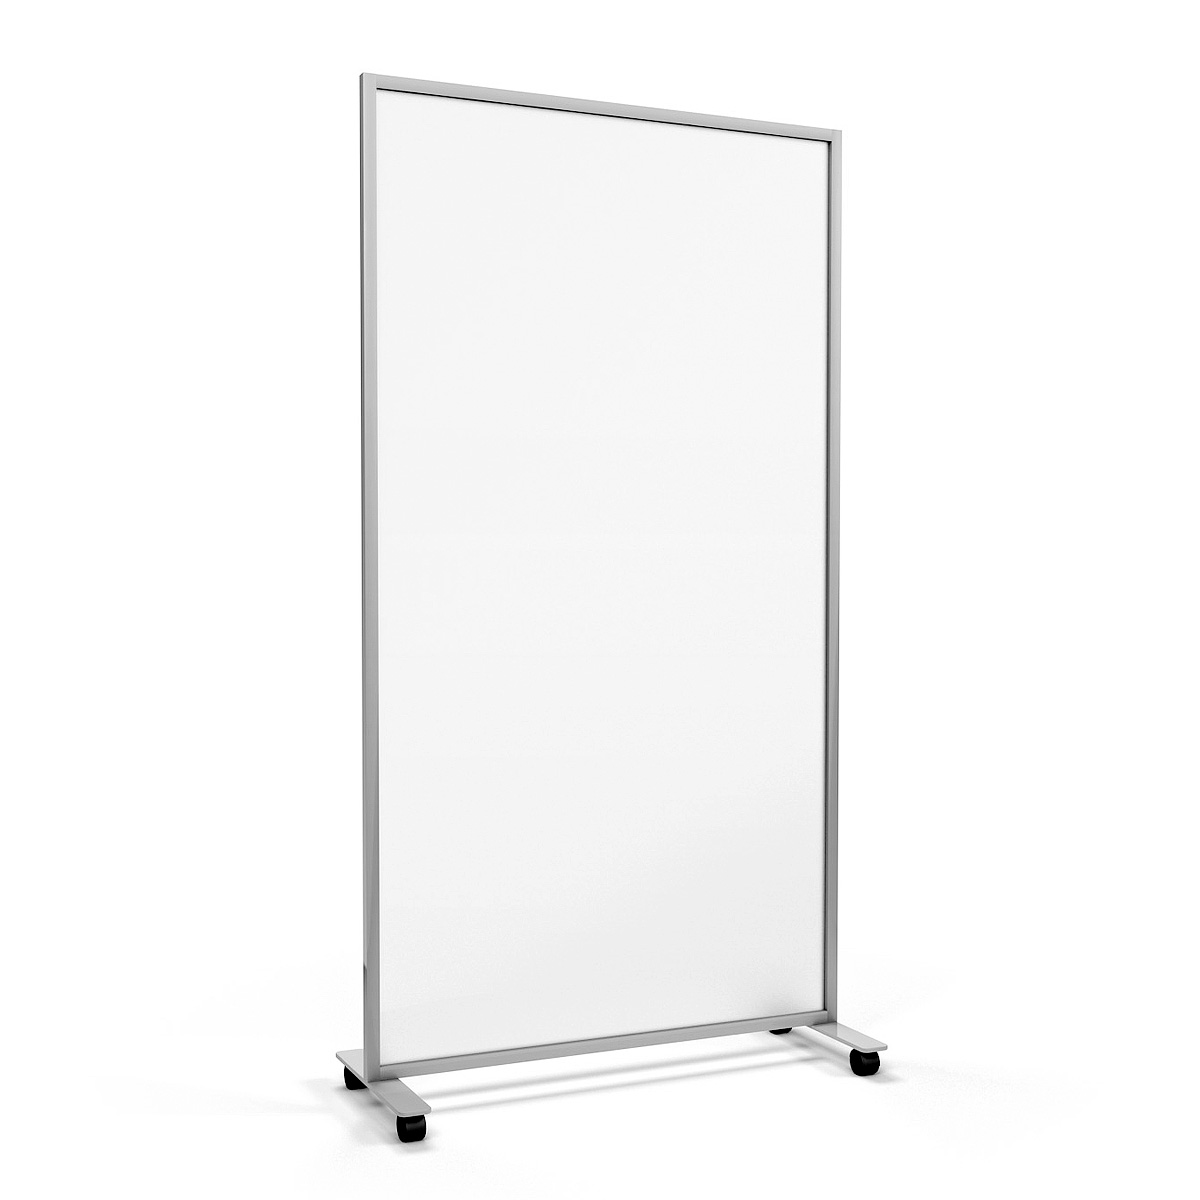 ACHOO® Frosted Perspex® Glass Office Divider is Mounted onto Easy Glide Locking Castor Wheels